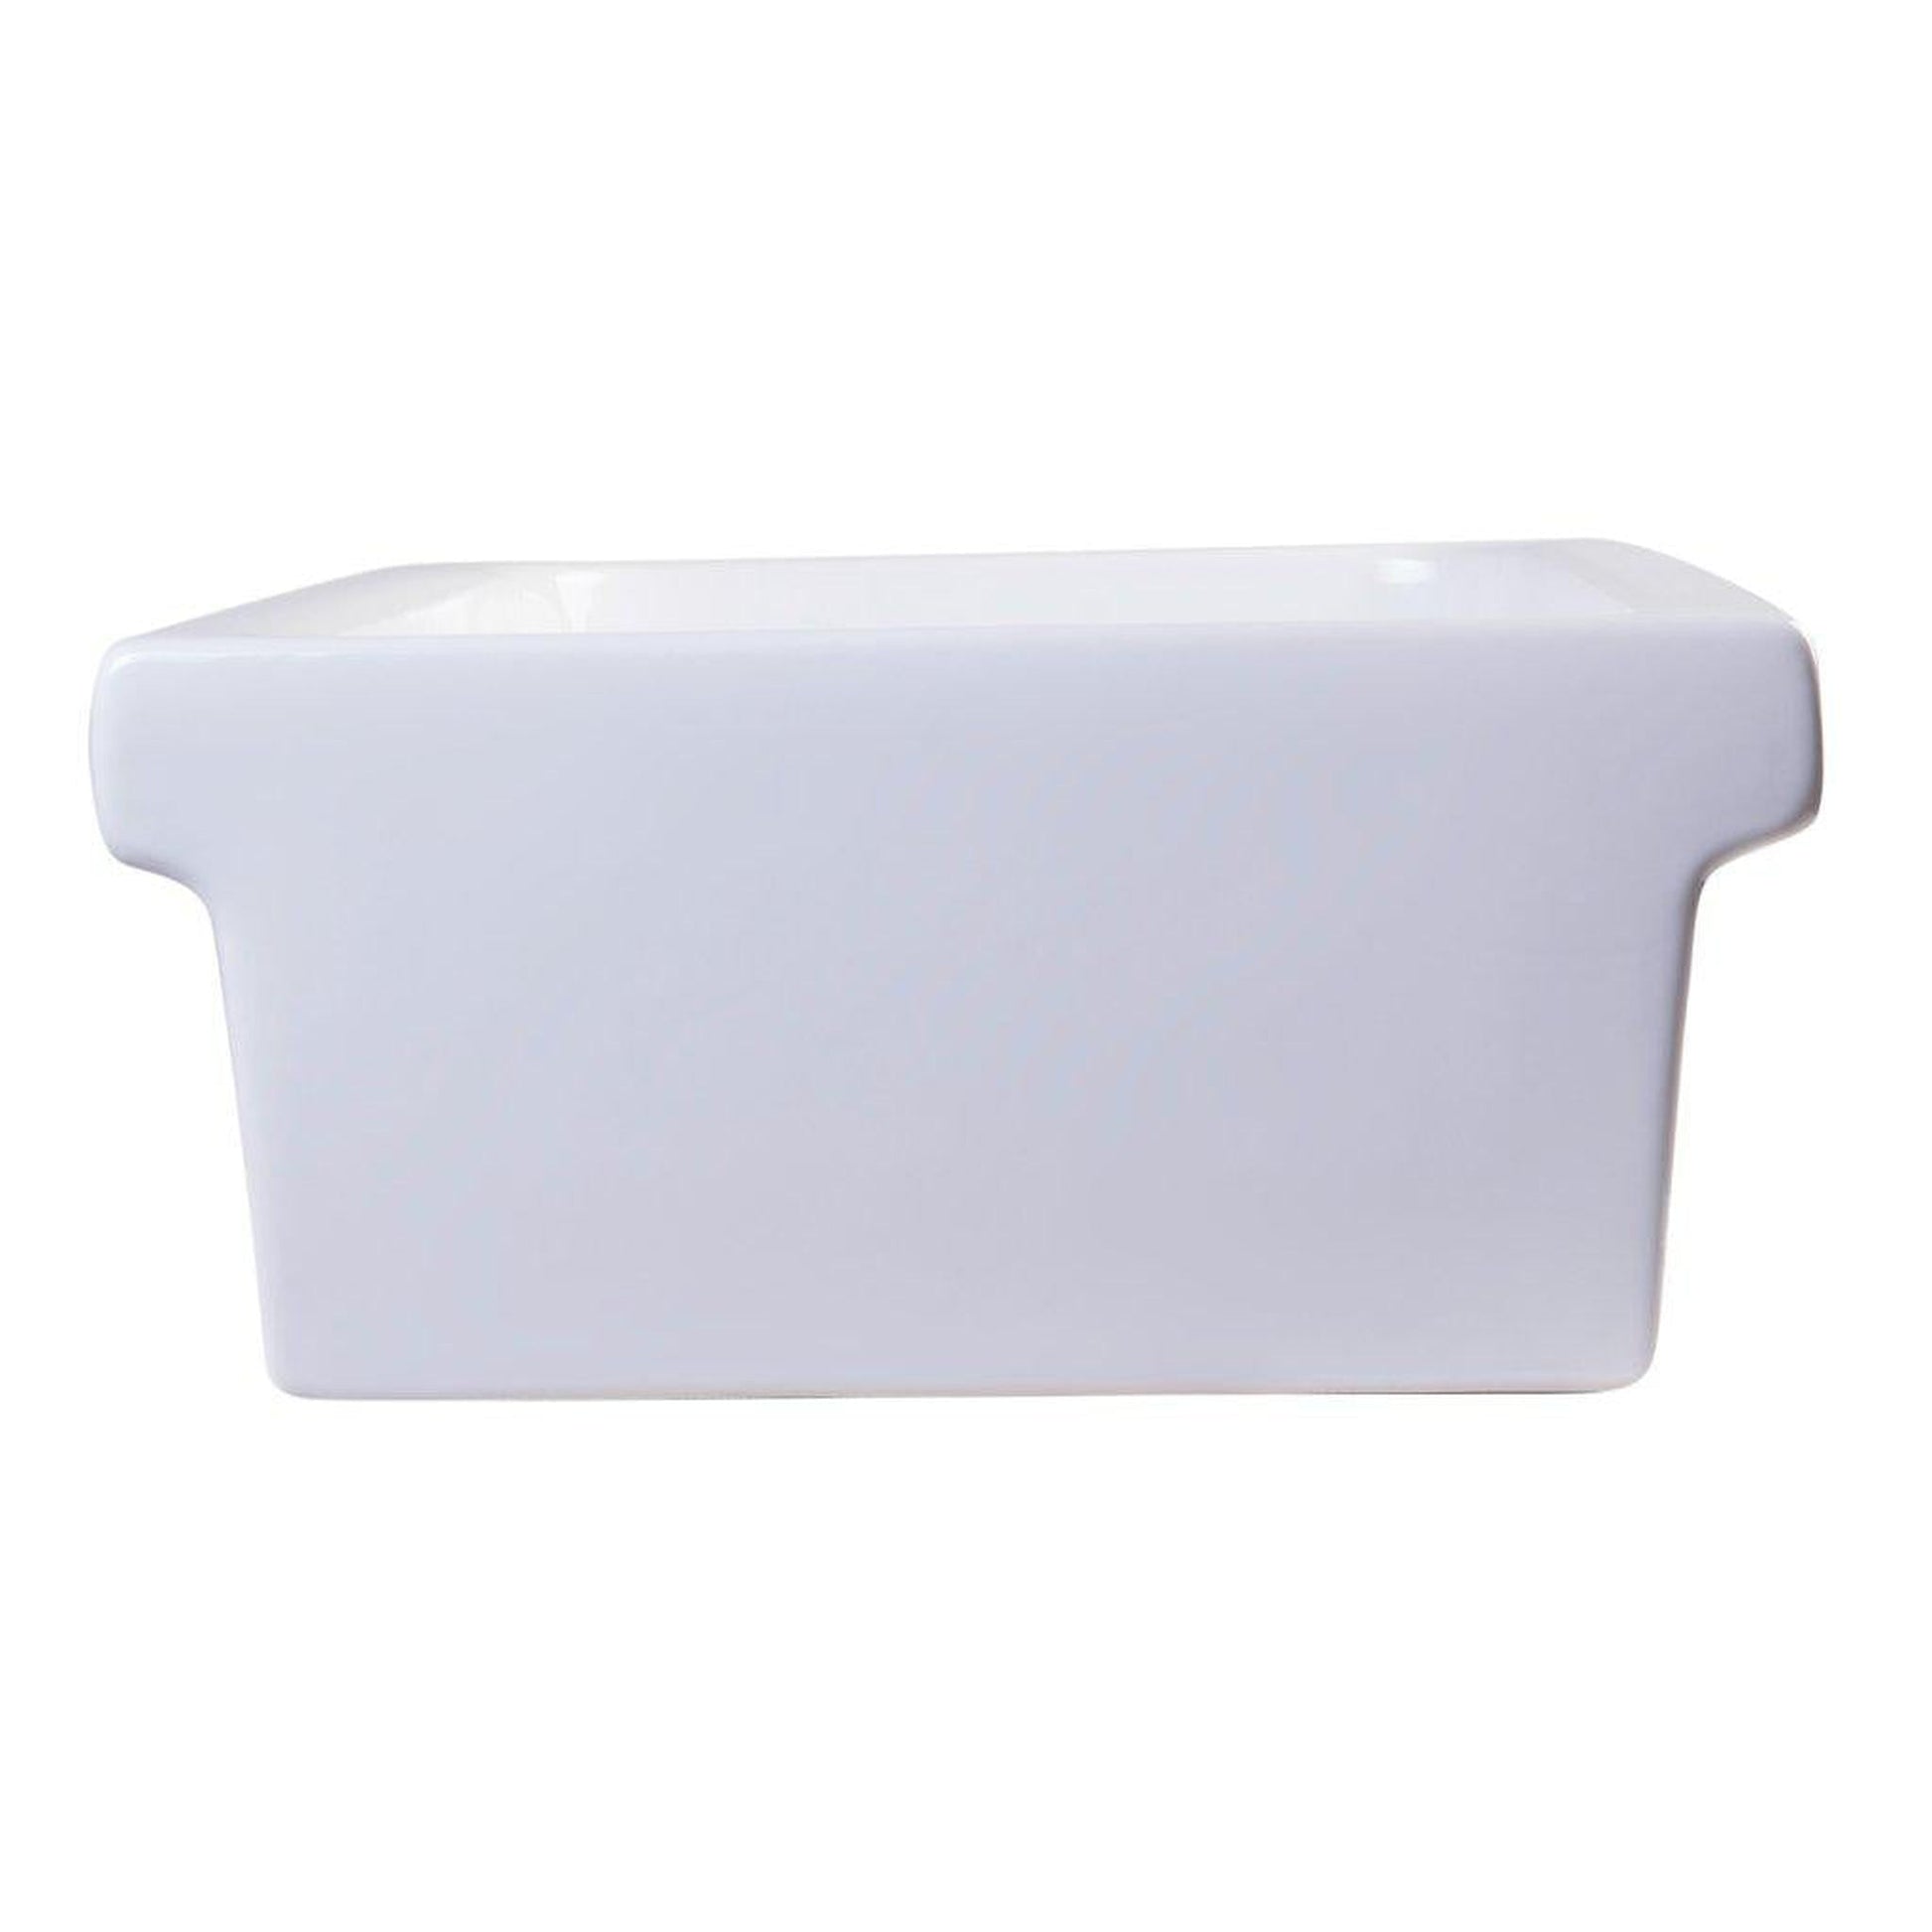 ALFI Brand AB36TR 36" White Above Mount Rectangle Fireclay Trough Bathroom Sink With Overflow